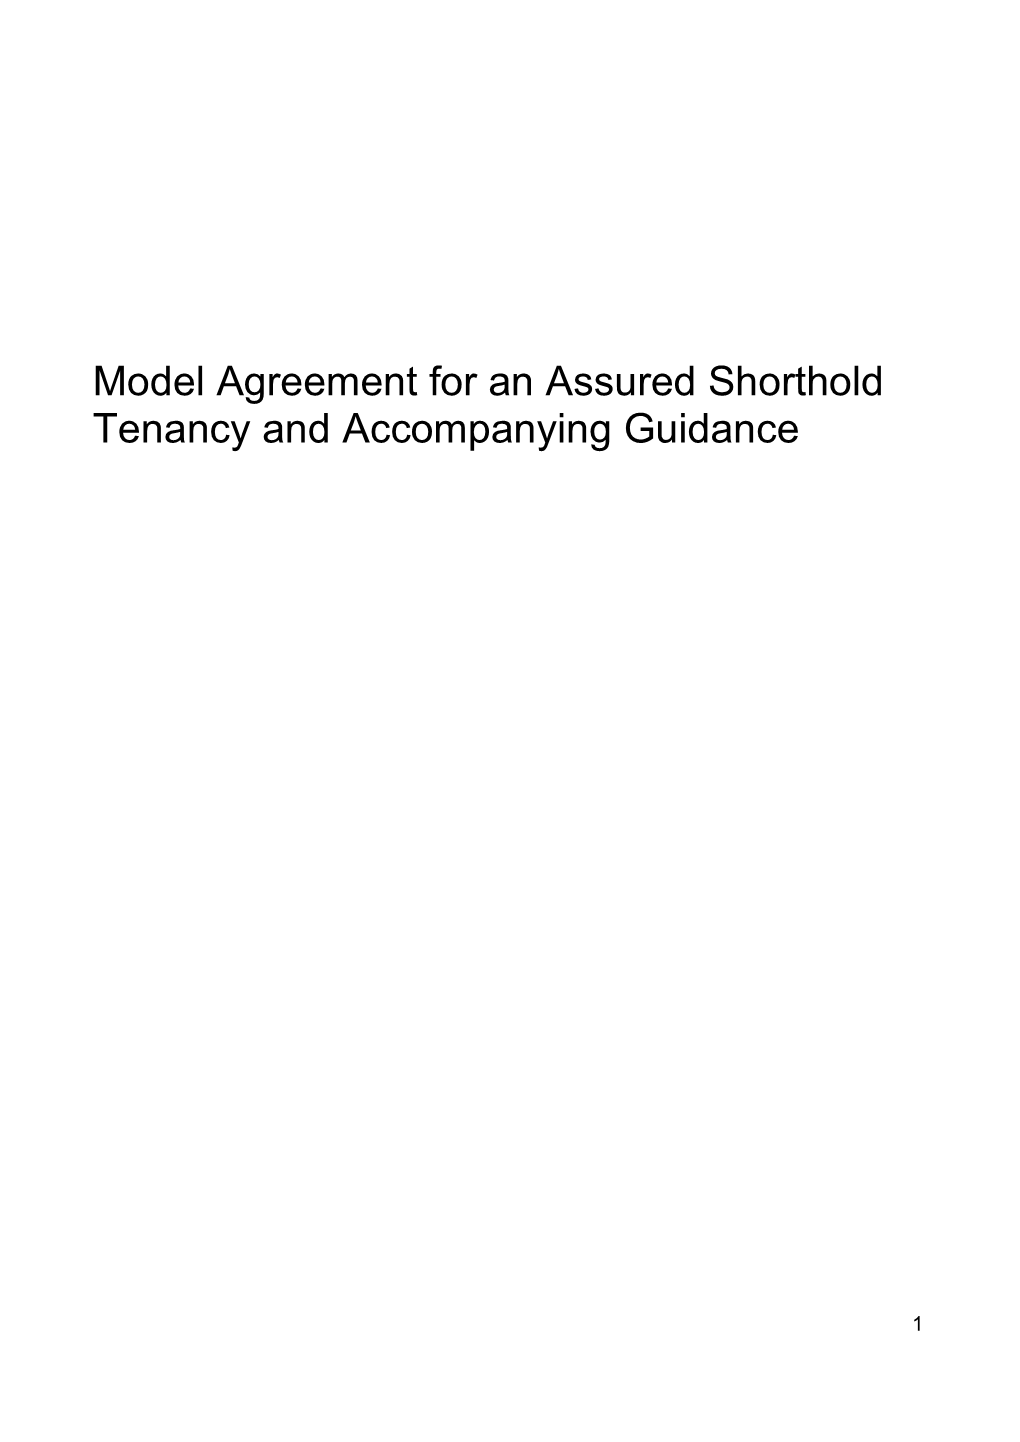 Model Agreement for an Assured Shorthold Tenancy and Accompanying Guidance